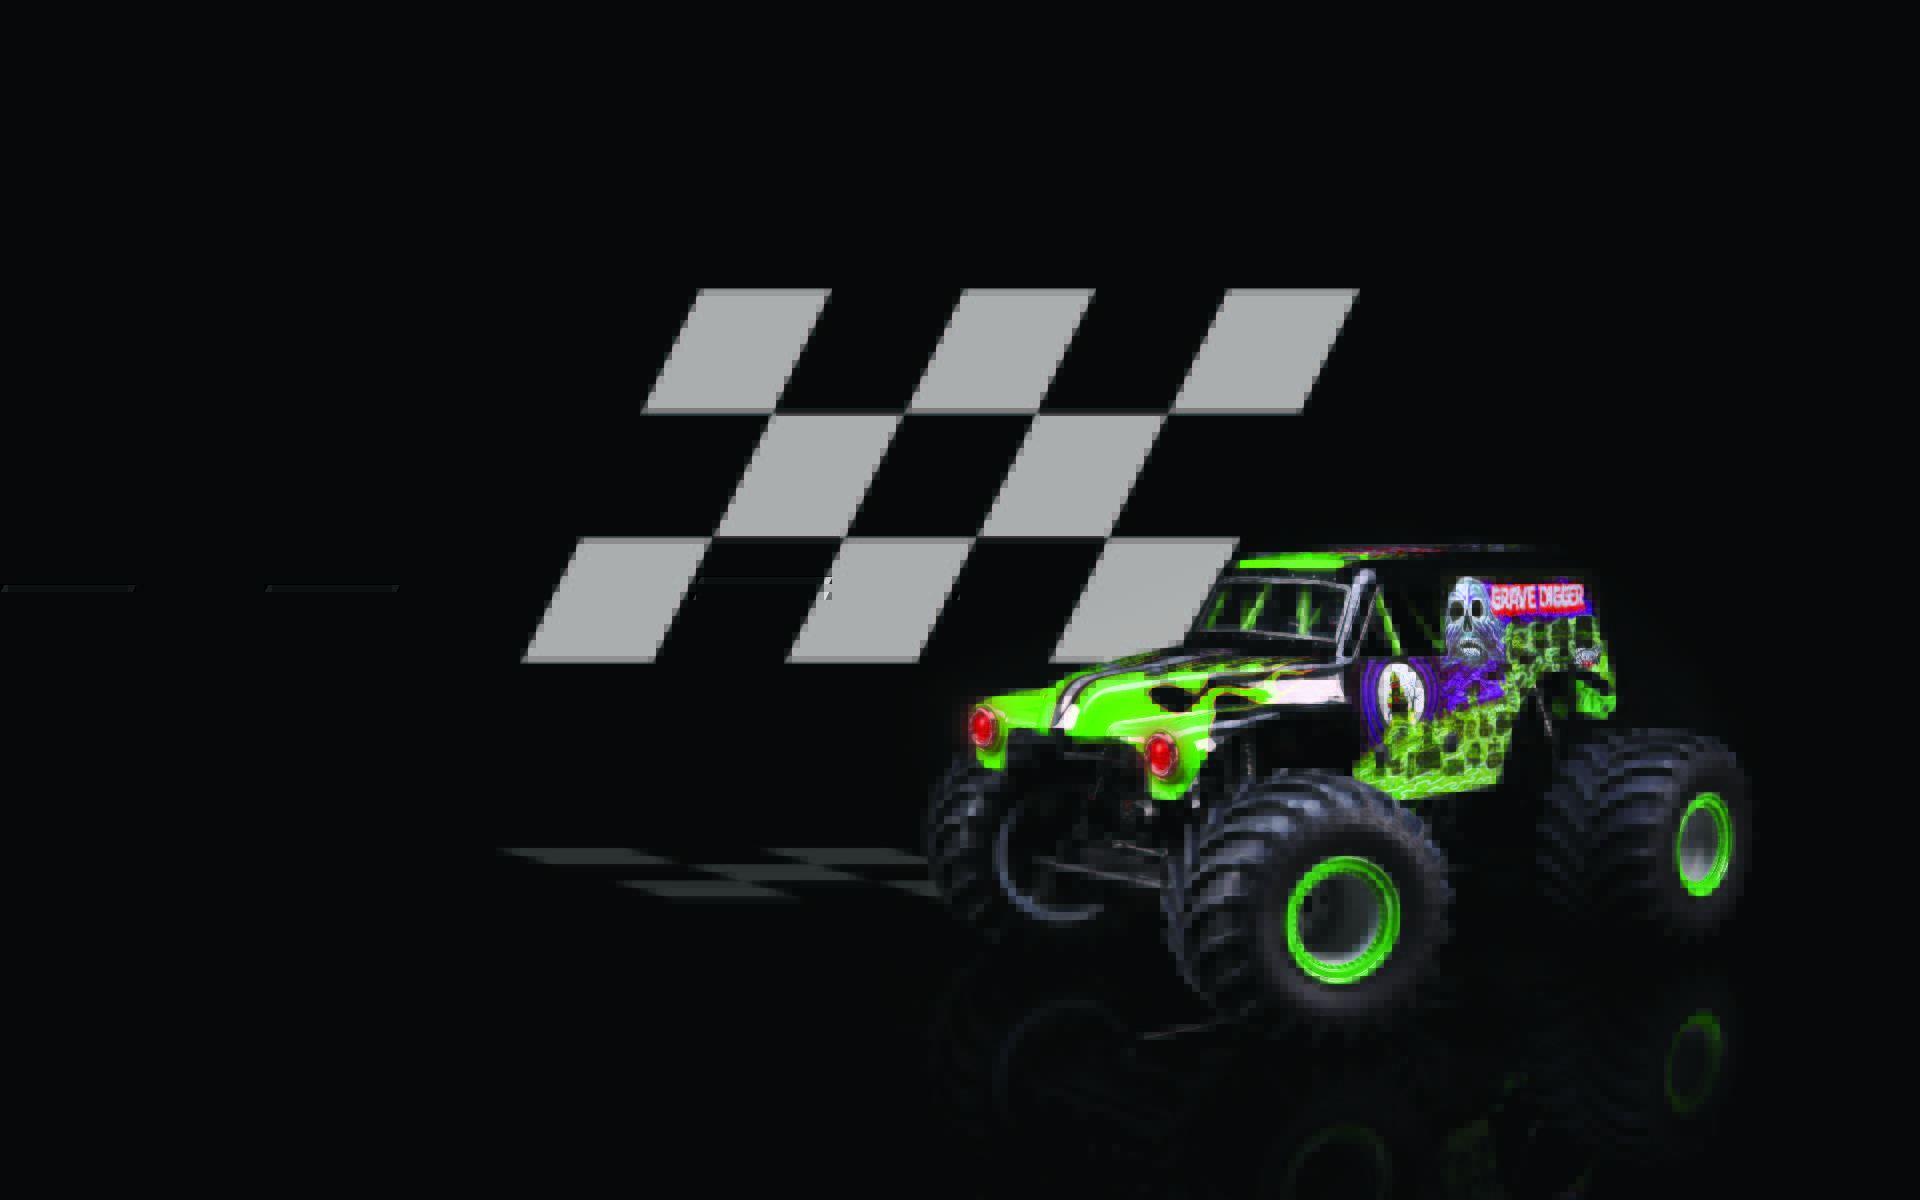 An Green Monster Truck Is In The Dirt With Large Tires Background Grave  Digger Pictures Background Image And Wallpaper for Free Download